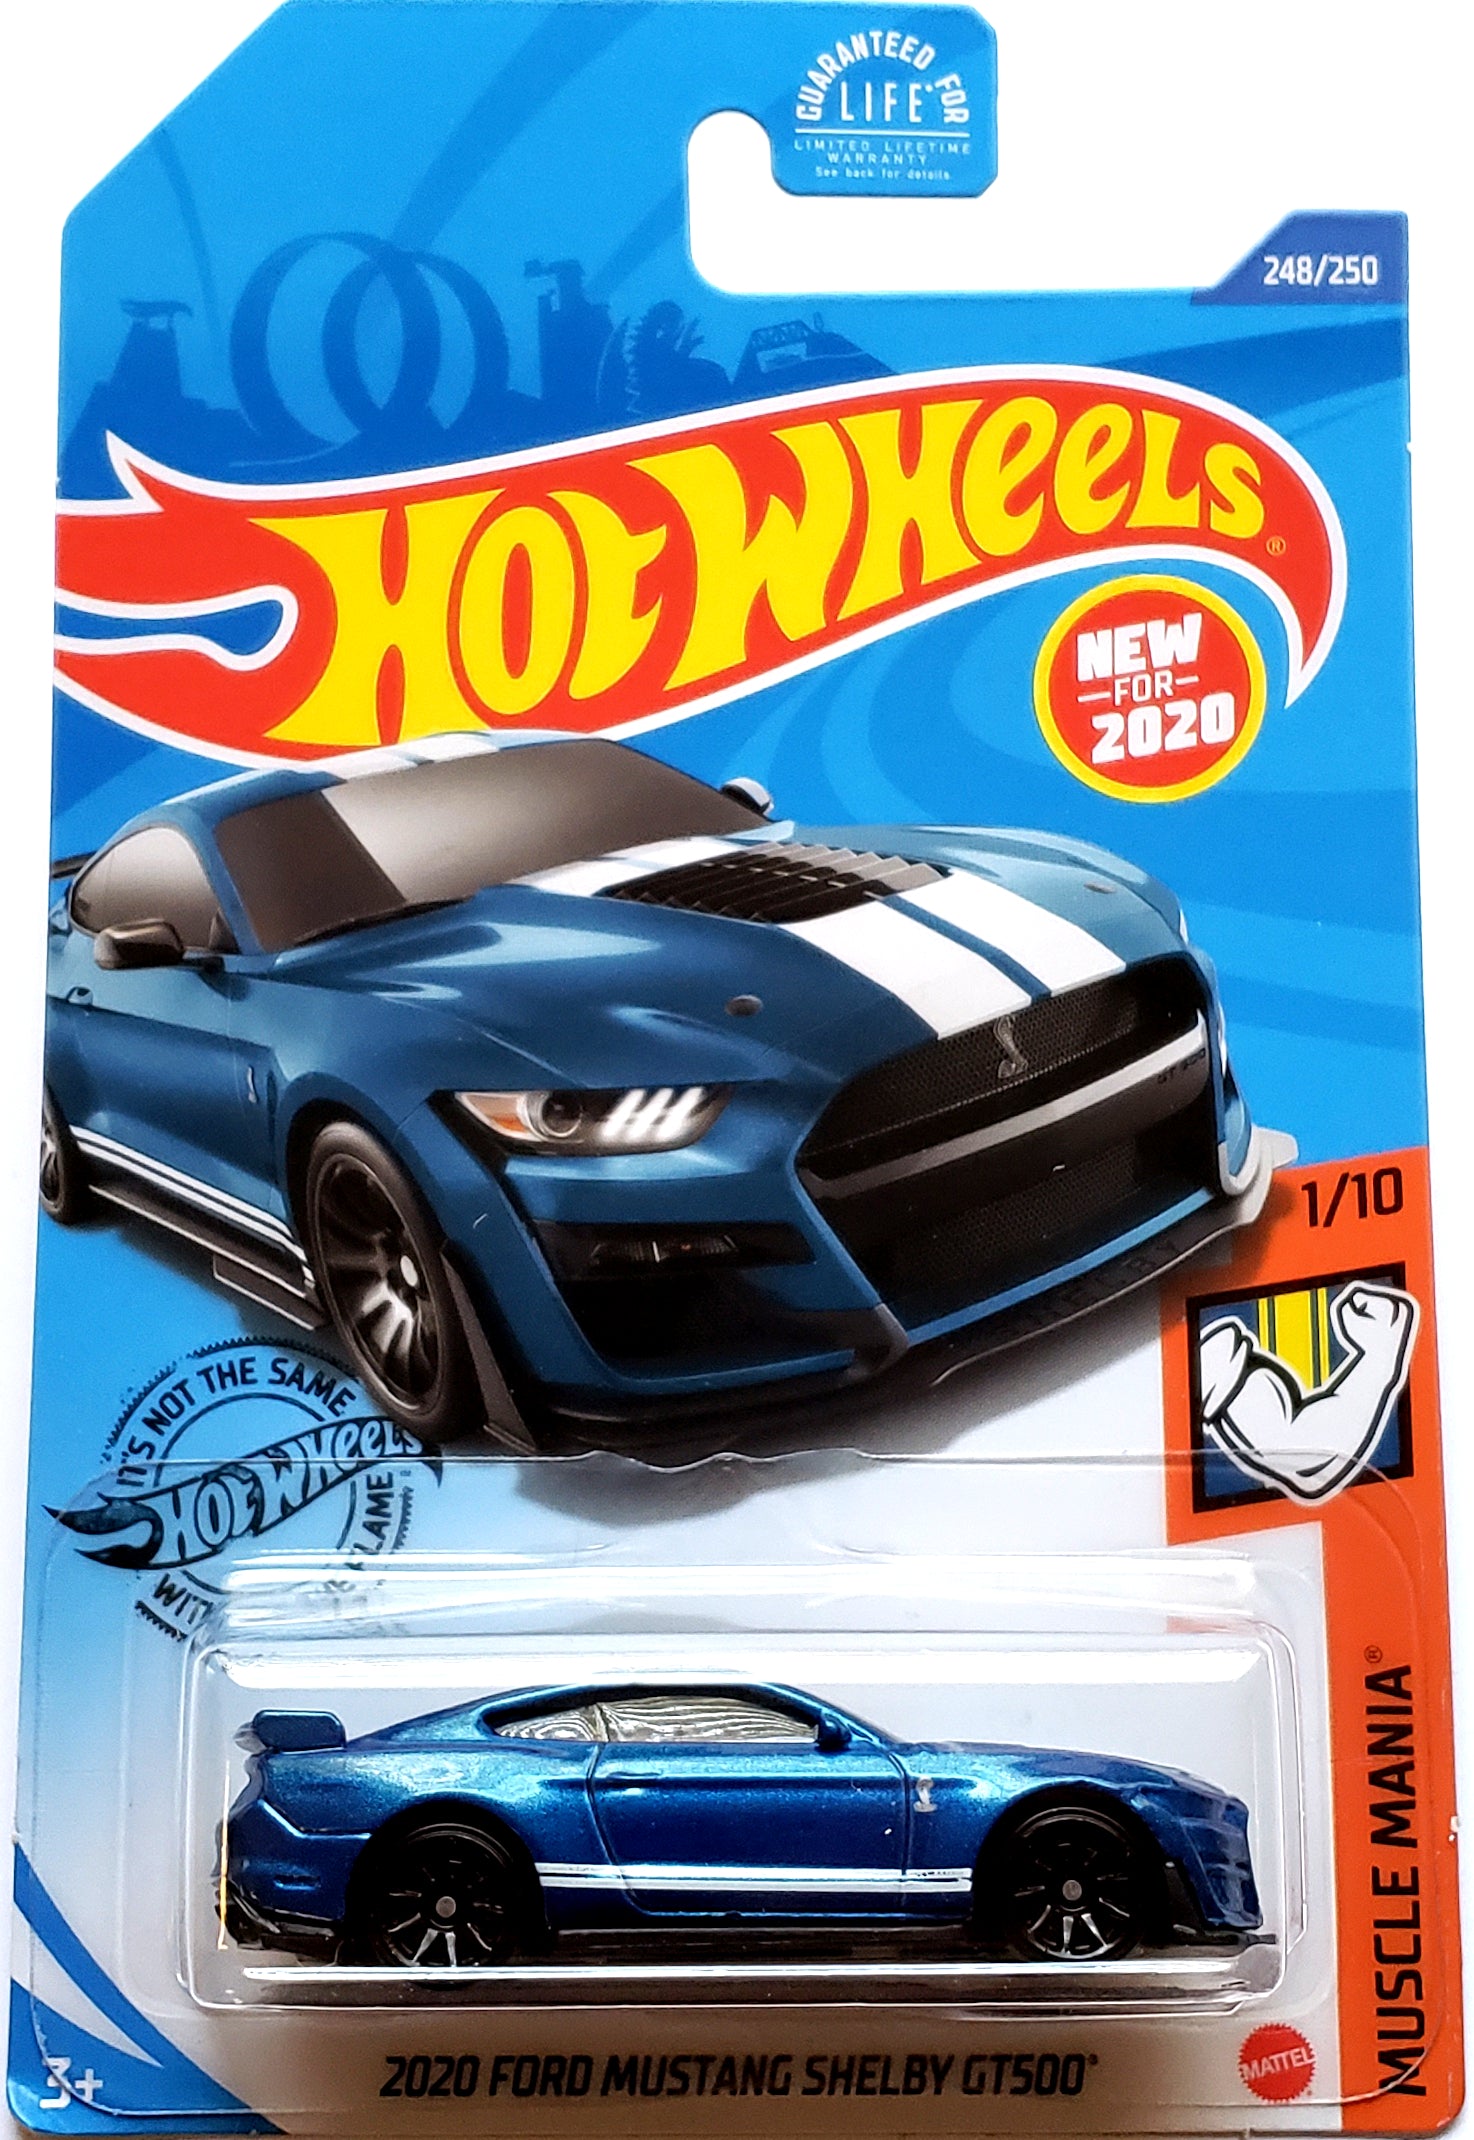 2020 Hot Wheels Mainline #248 - 2020 Ford Mustang Shelby GT500 (Blue) GHB32